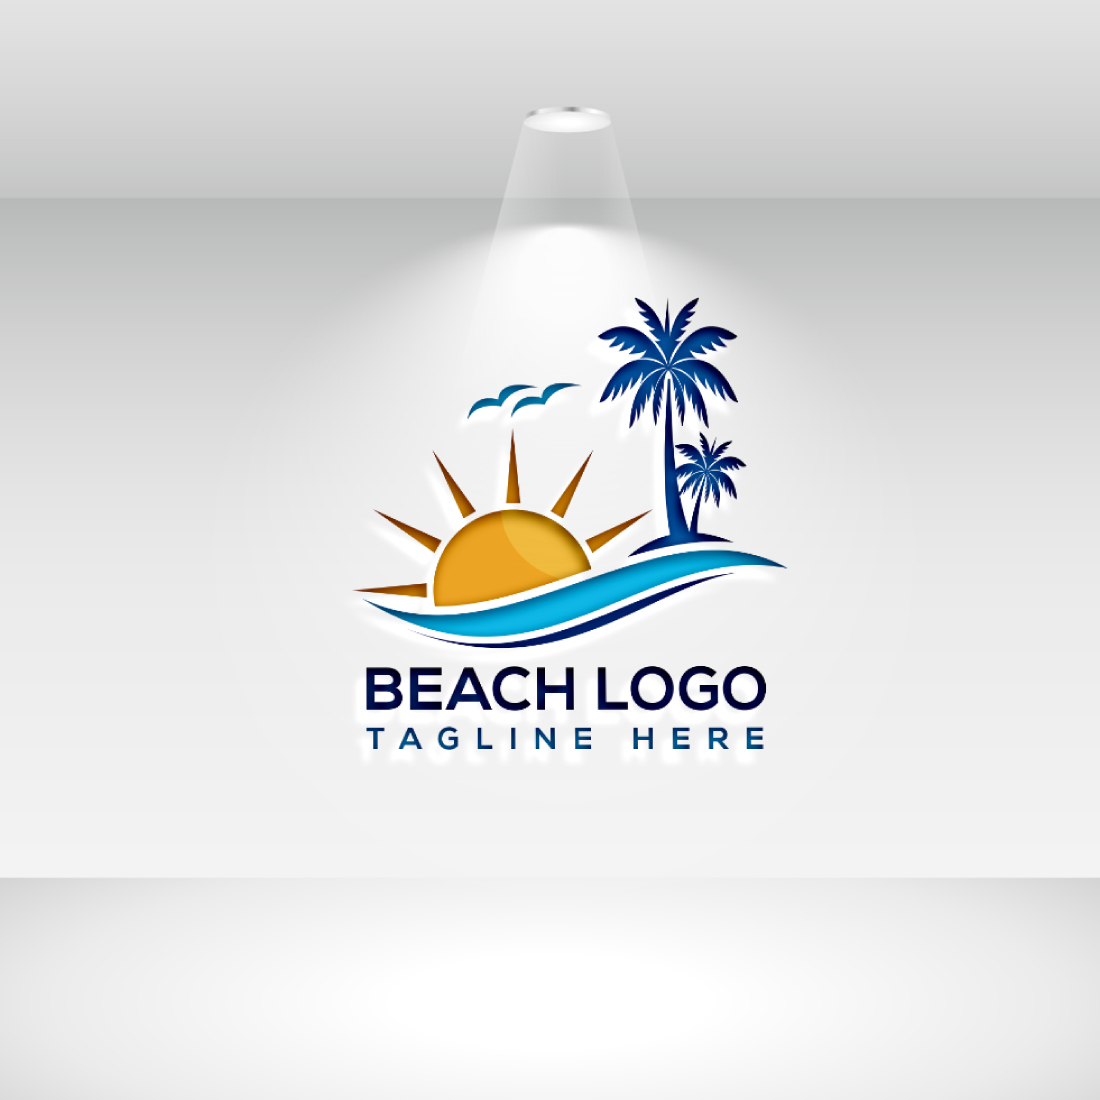 Tropical Beach Simple Logo Graphics cover image.